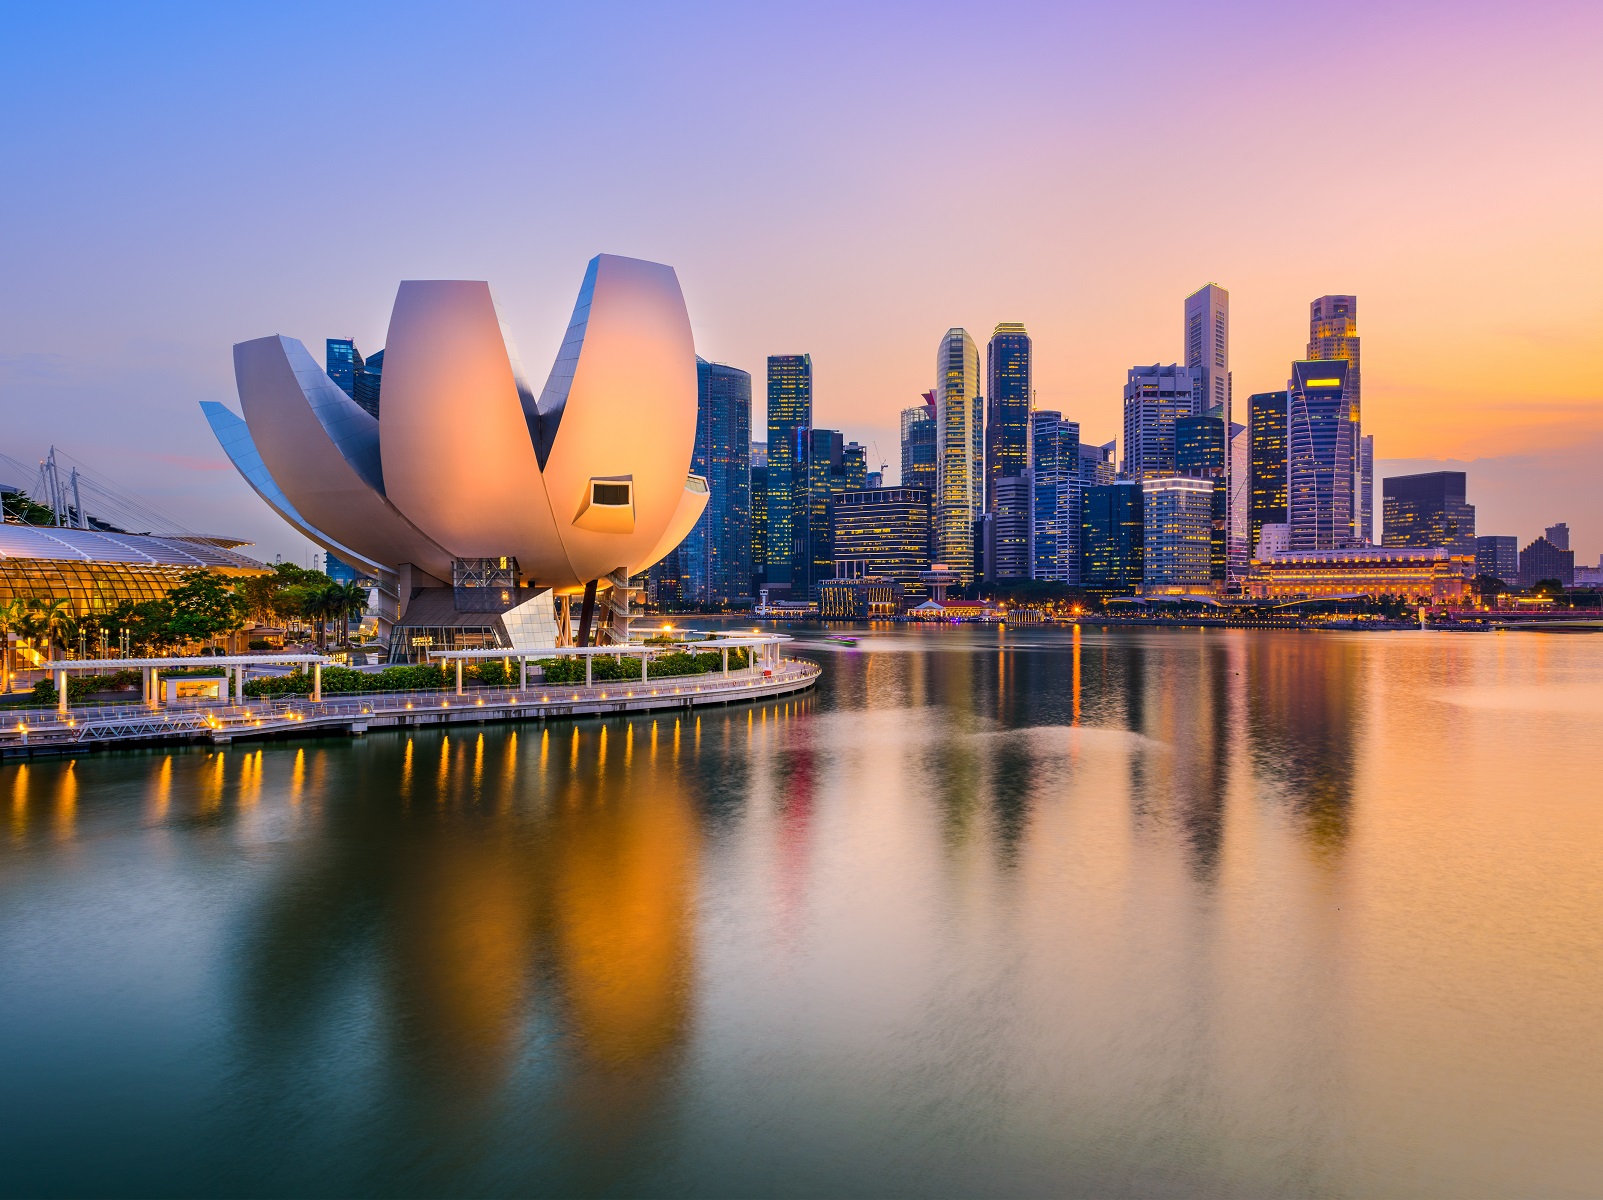 Singapore Introduces Licensing for Crypto Platforms, New Payment Services Act Now in Force